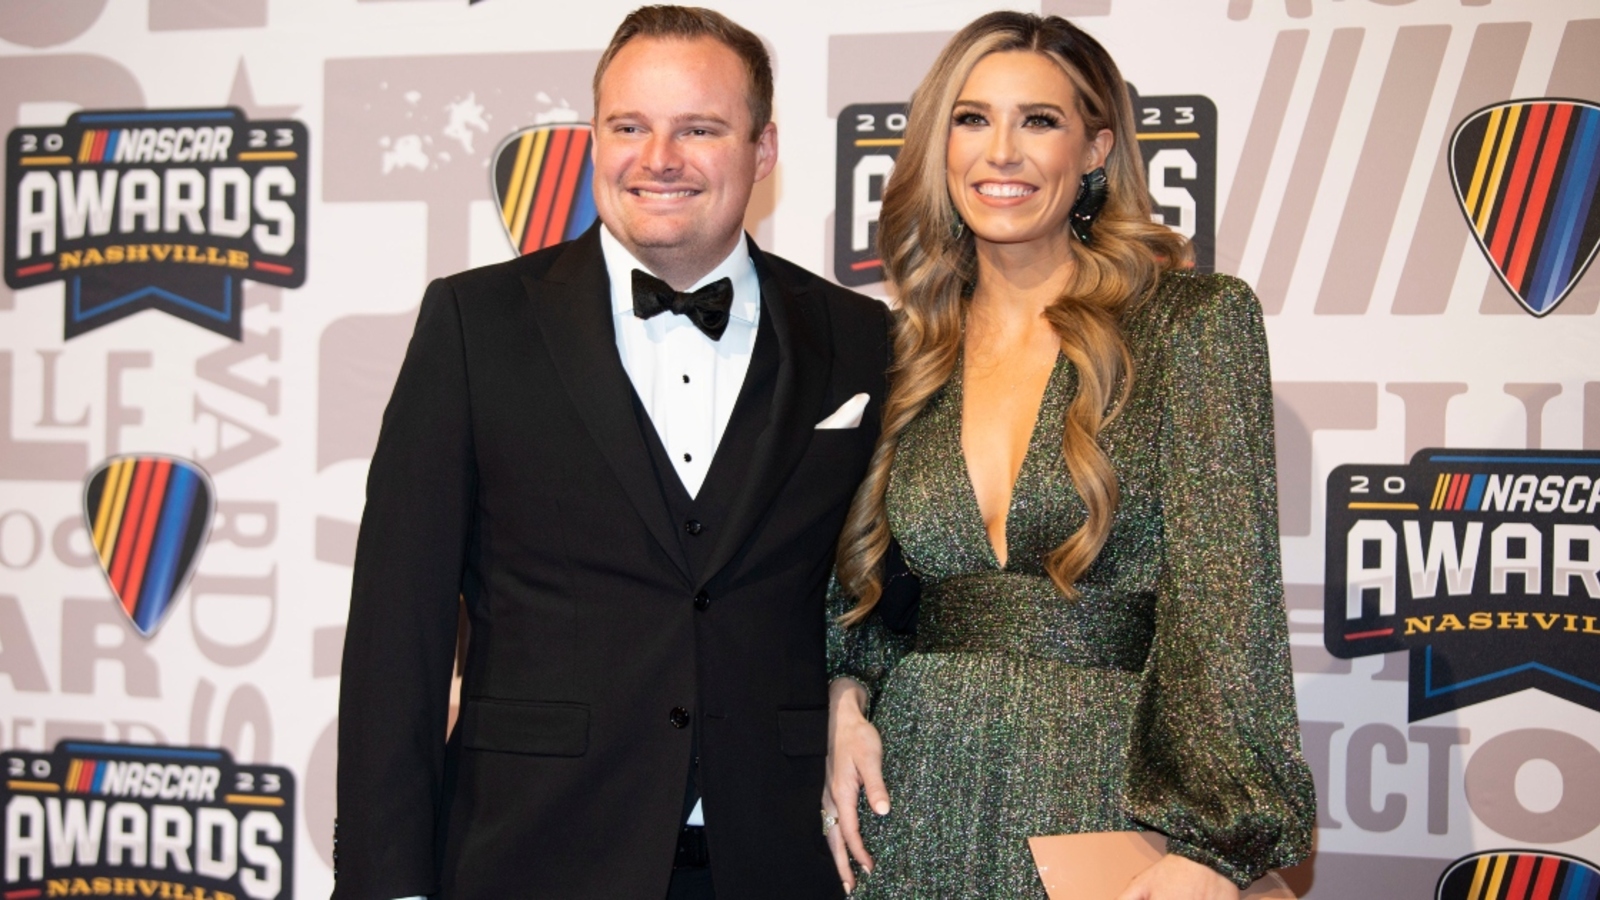 Cole Custer and wife Kari announce pregnancy, will have baby boy in August